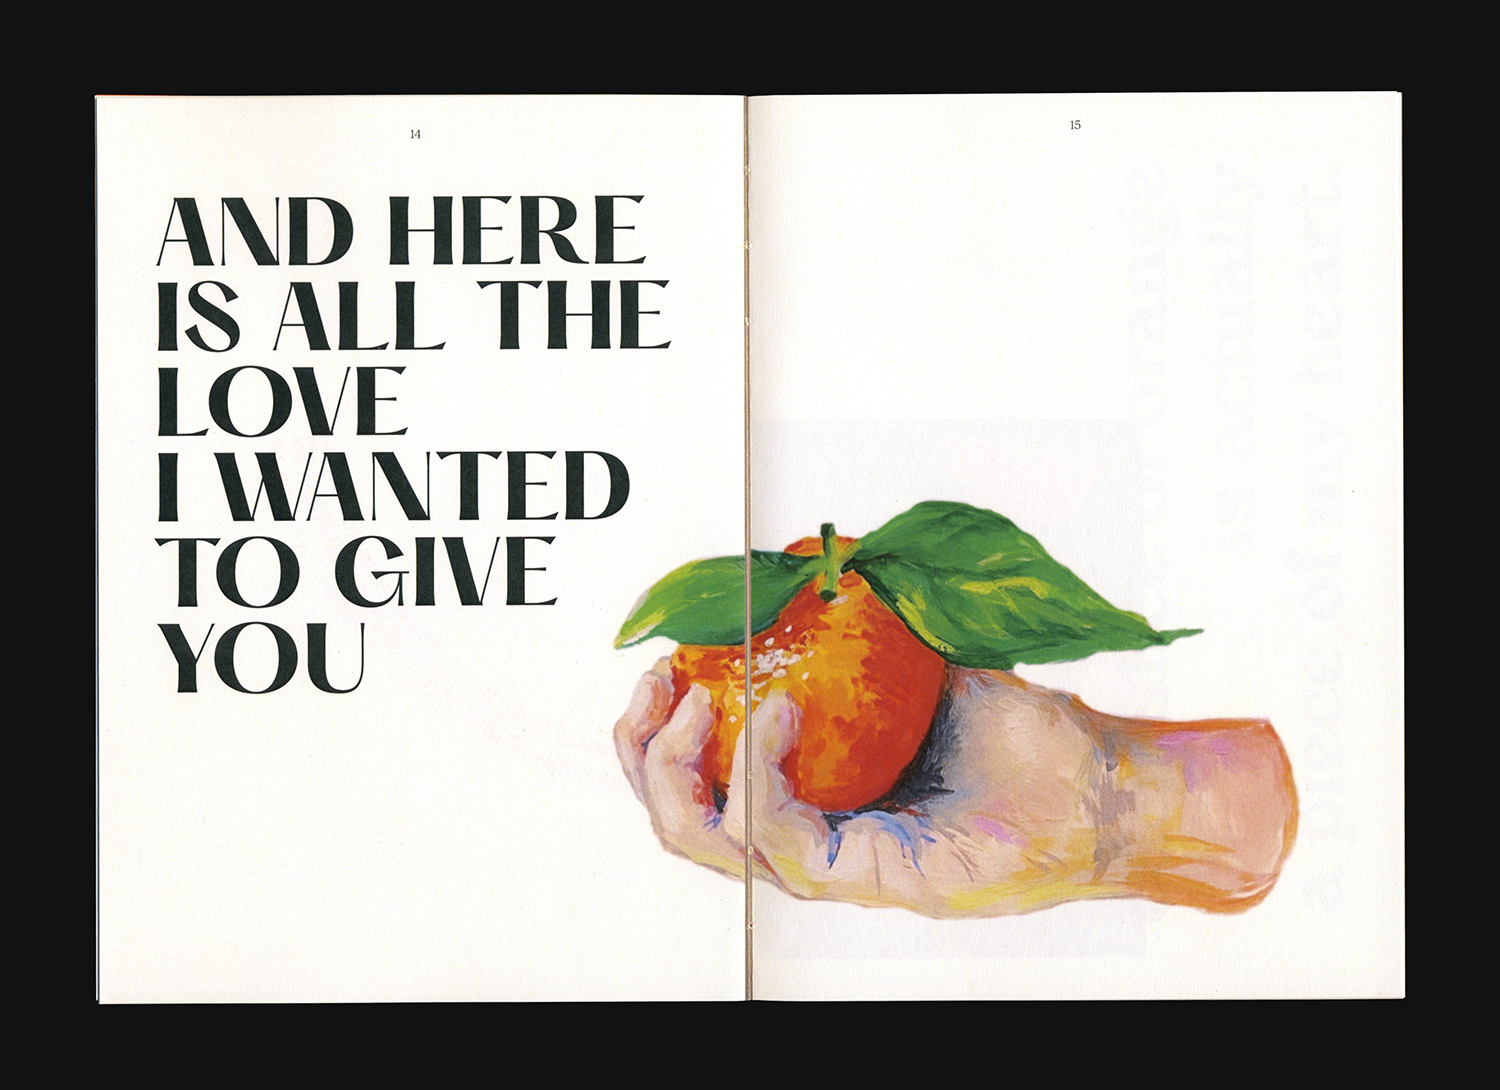 Book spread with text and an illustration.